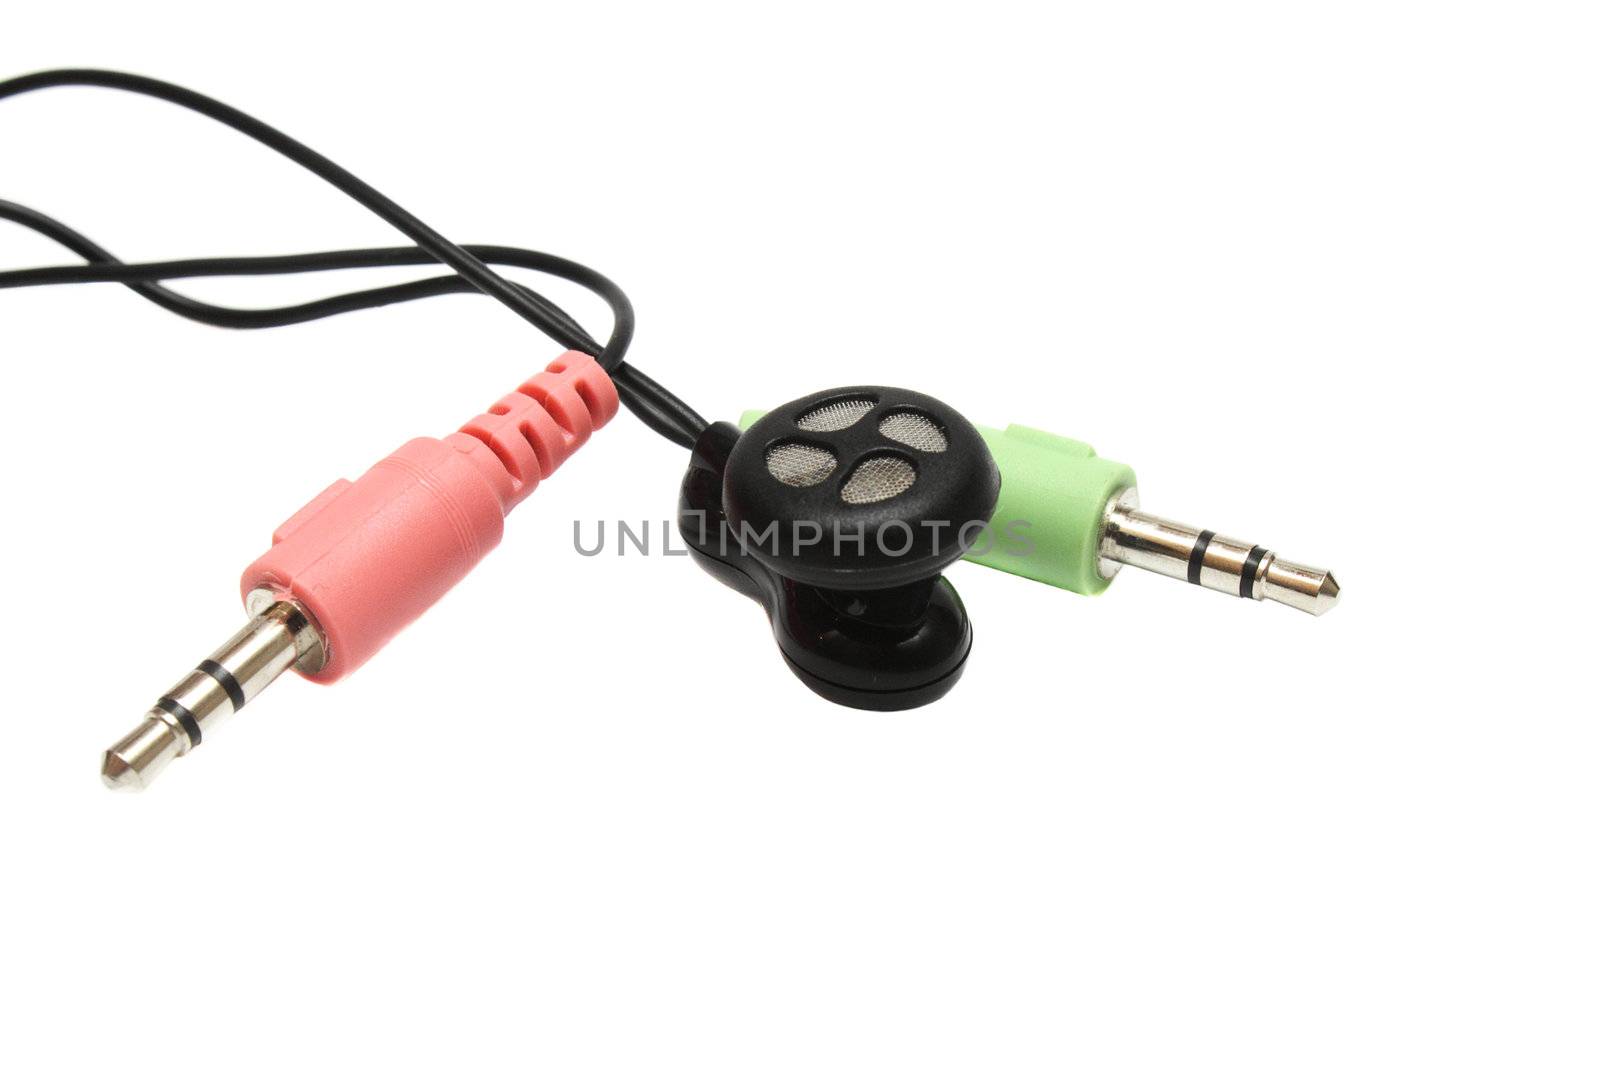 Microphone and headset plugs on white background by pulen